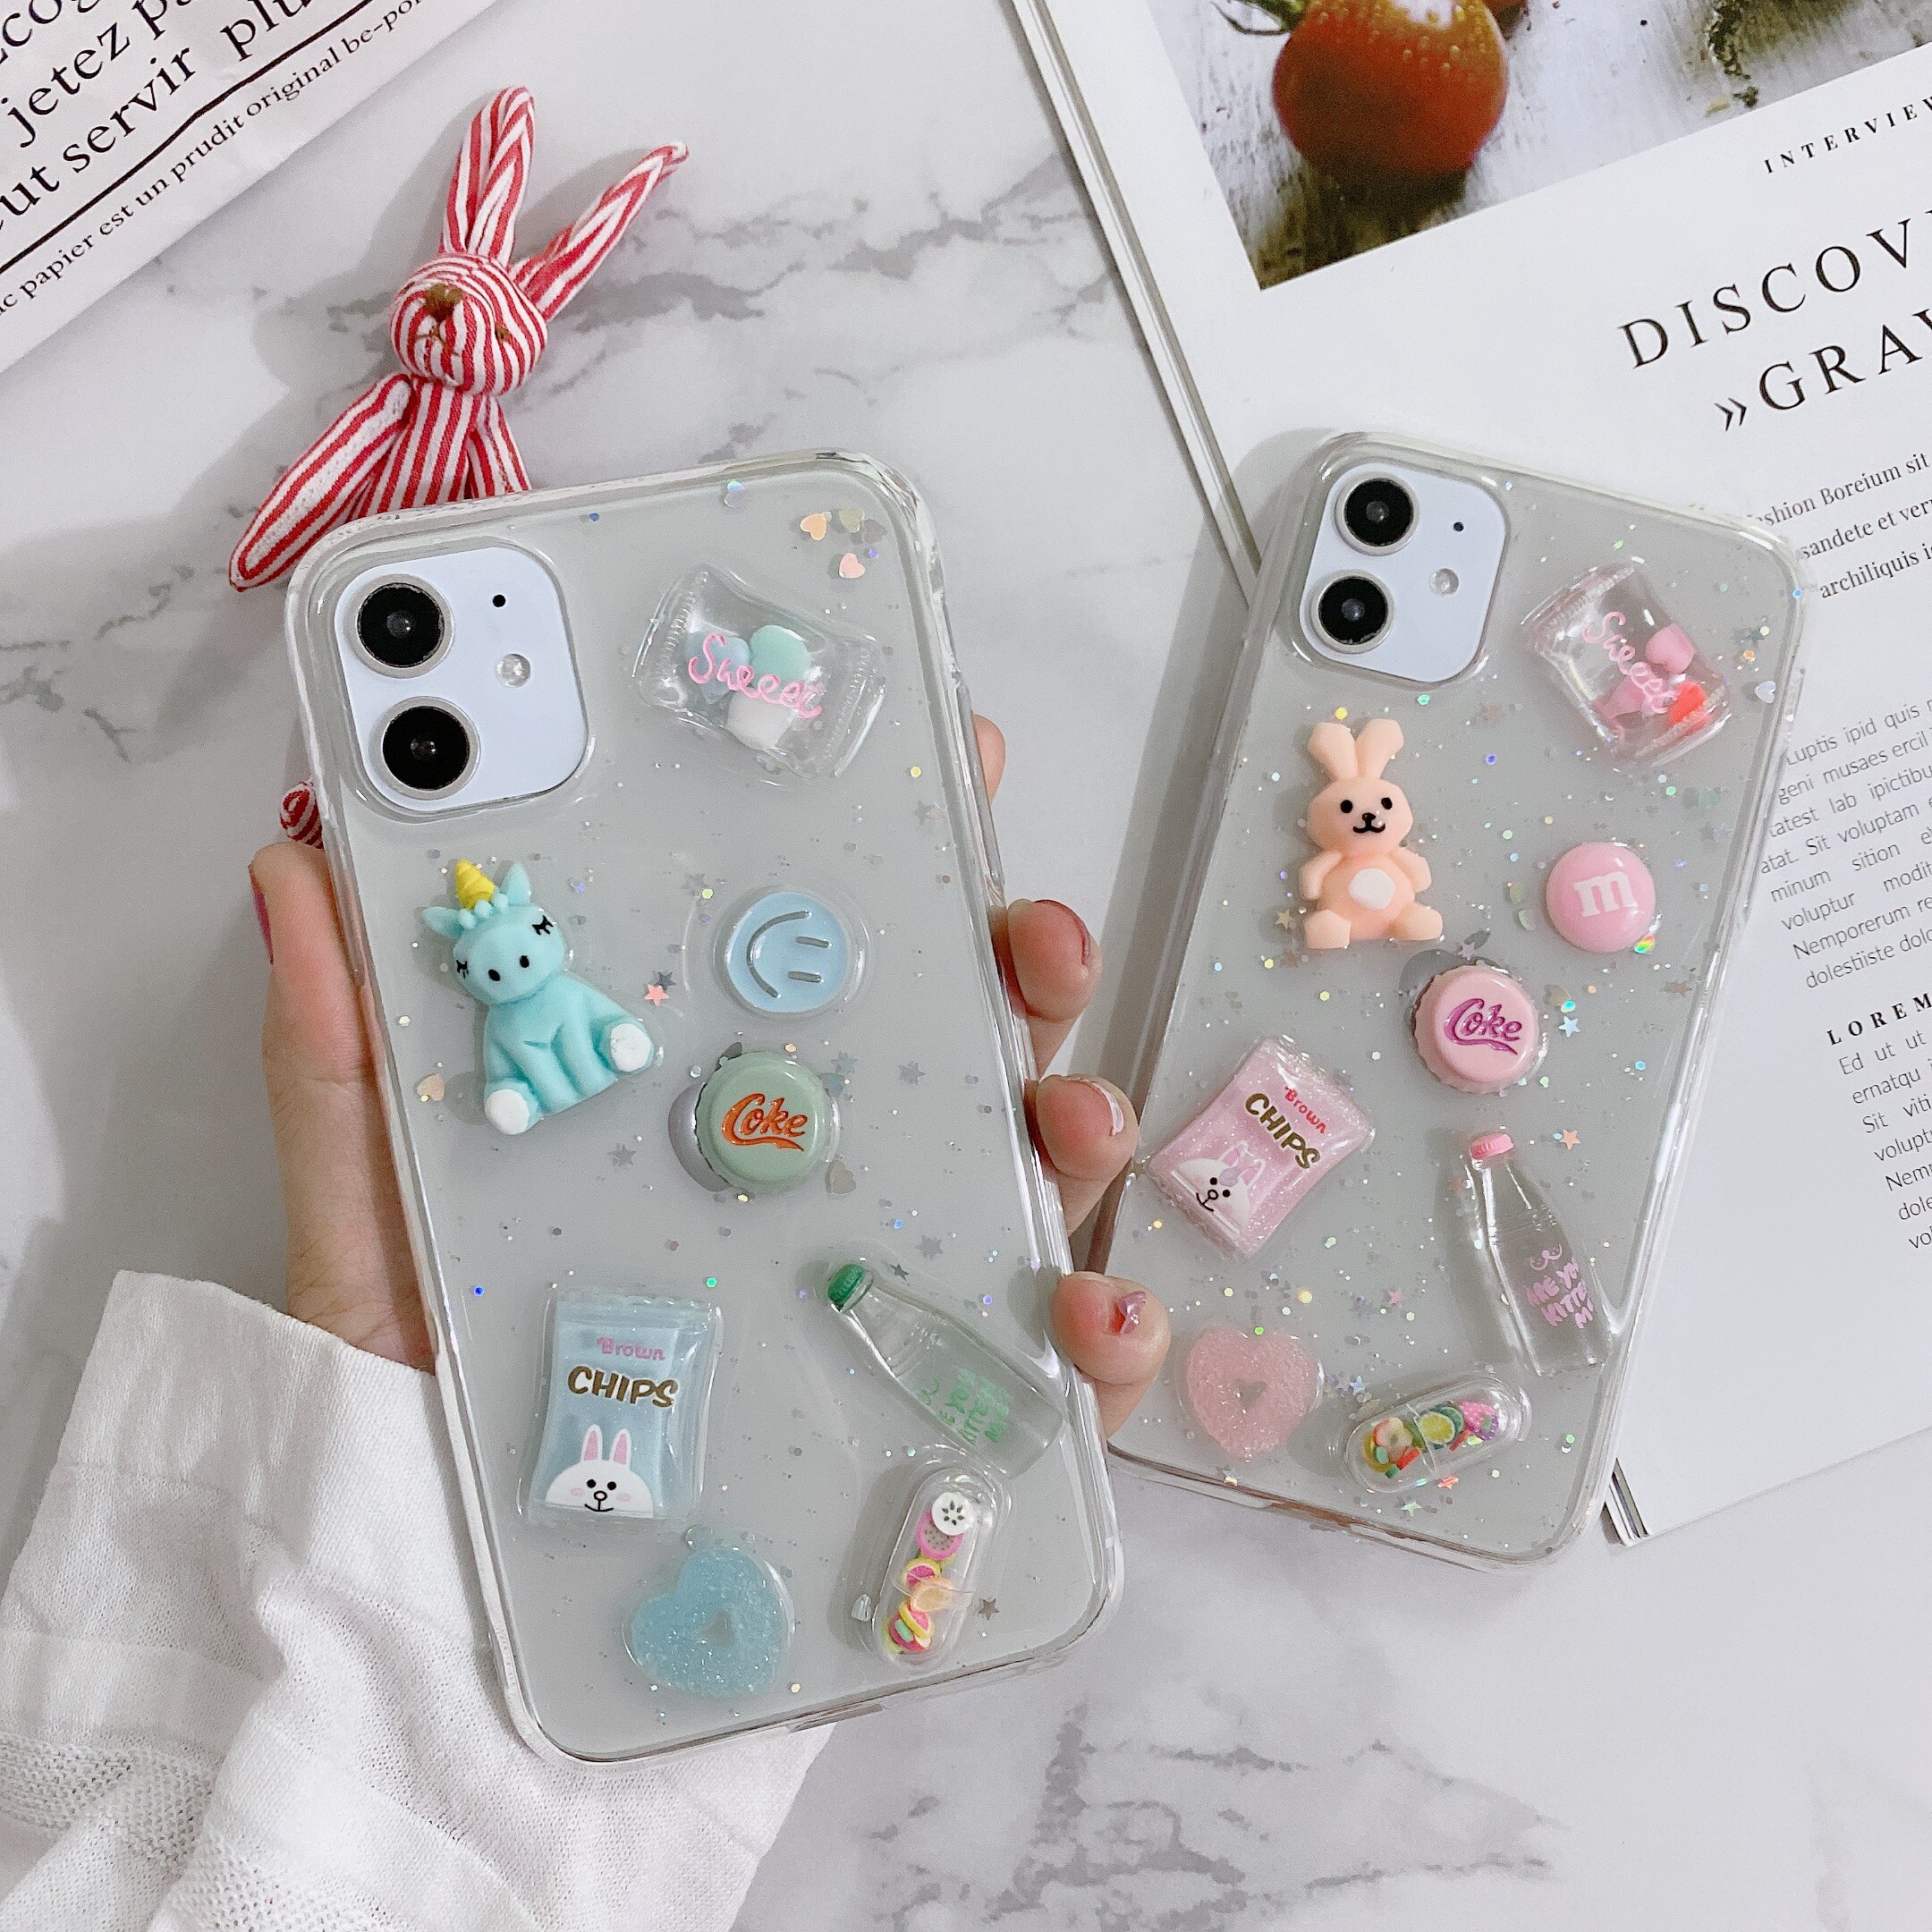 Drink bottle small doll Epoxy phone case For iPhone 11 Pro X XS MAX XR 6S 7 8 Plus For huawei mate 20 30 P20 30 Nova 5 6 Cover